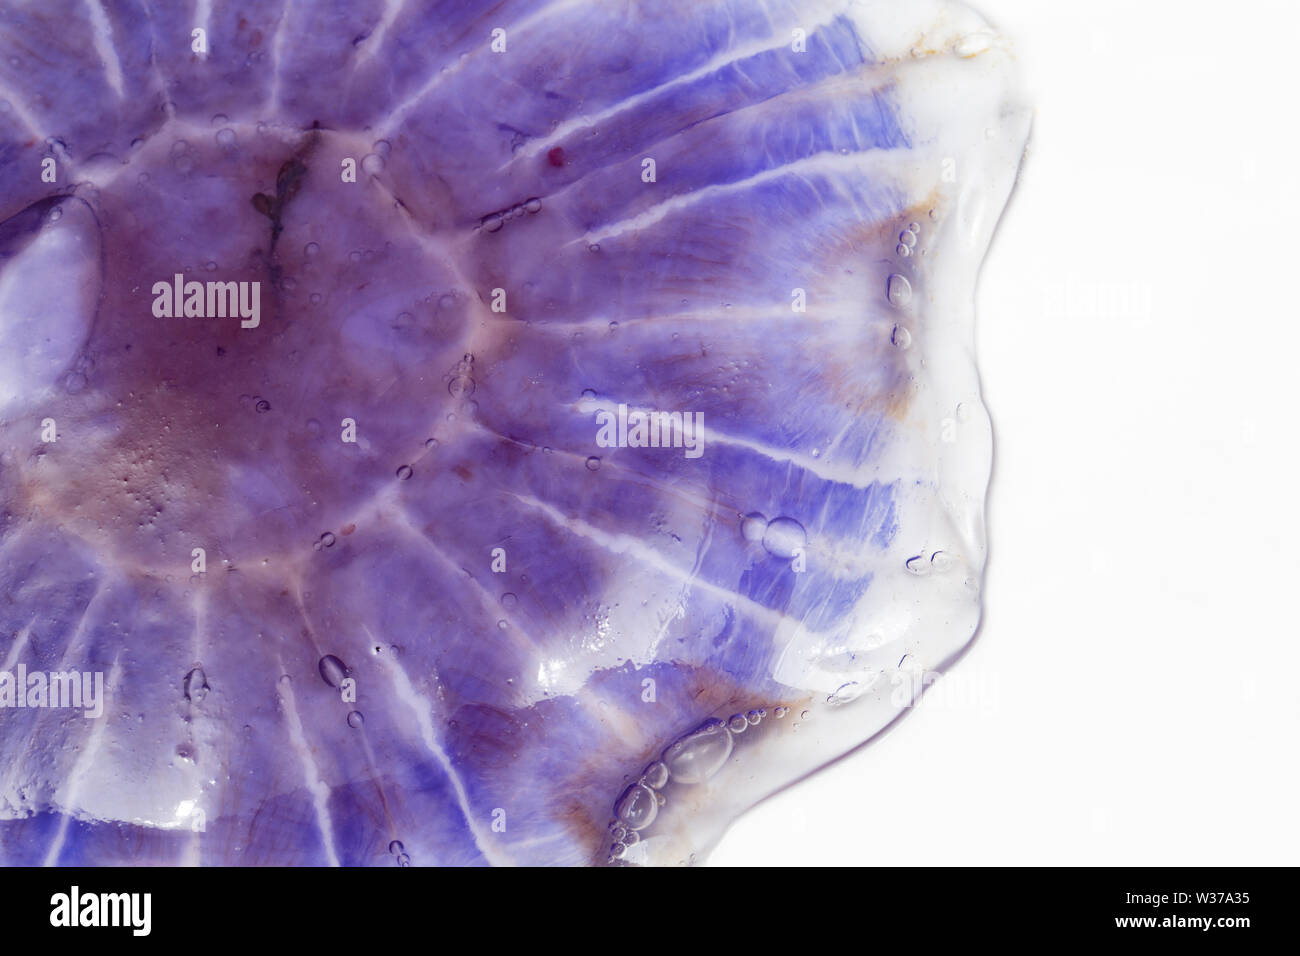 A Blue Jellyfish, Cyanea lamarckii, found washed up on Chesil beach in Dorset and photographed on a white background. Dorset England UK GB Stock Photo